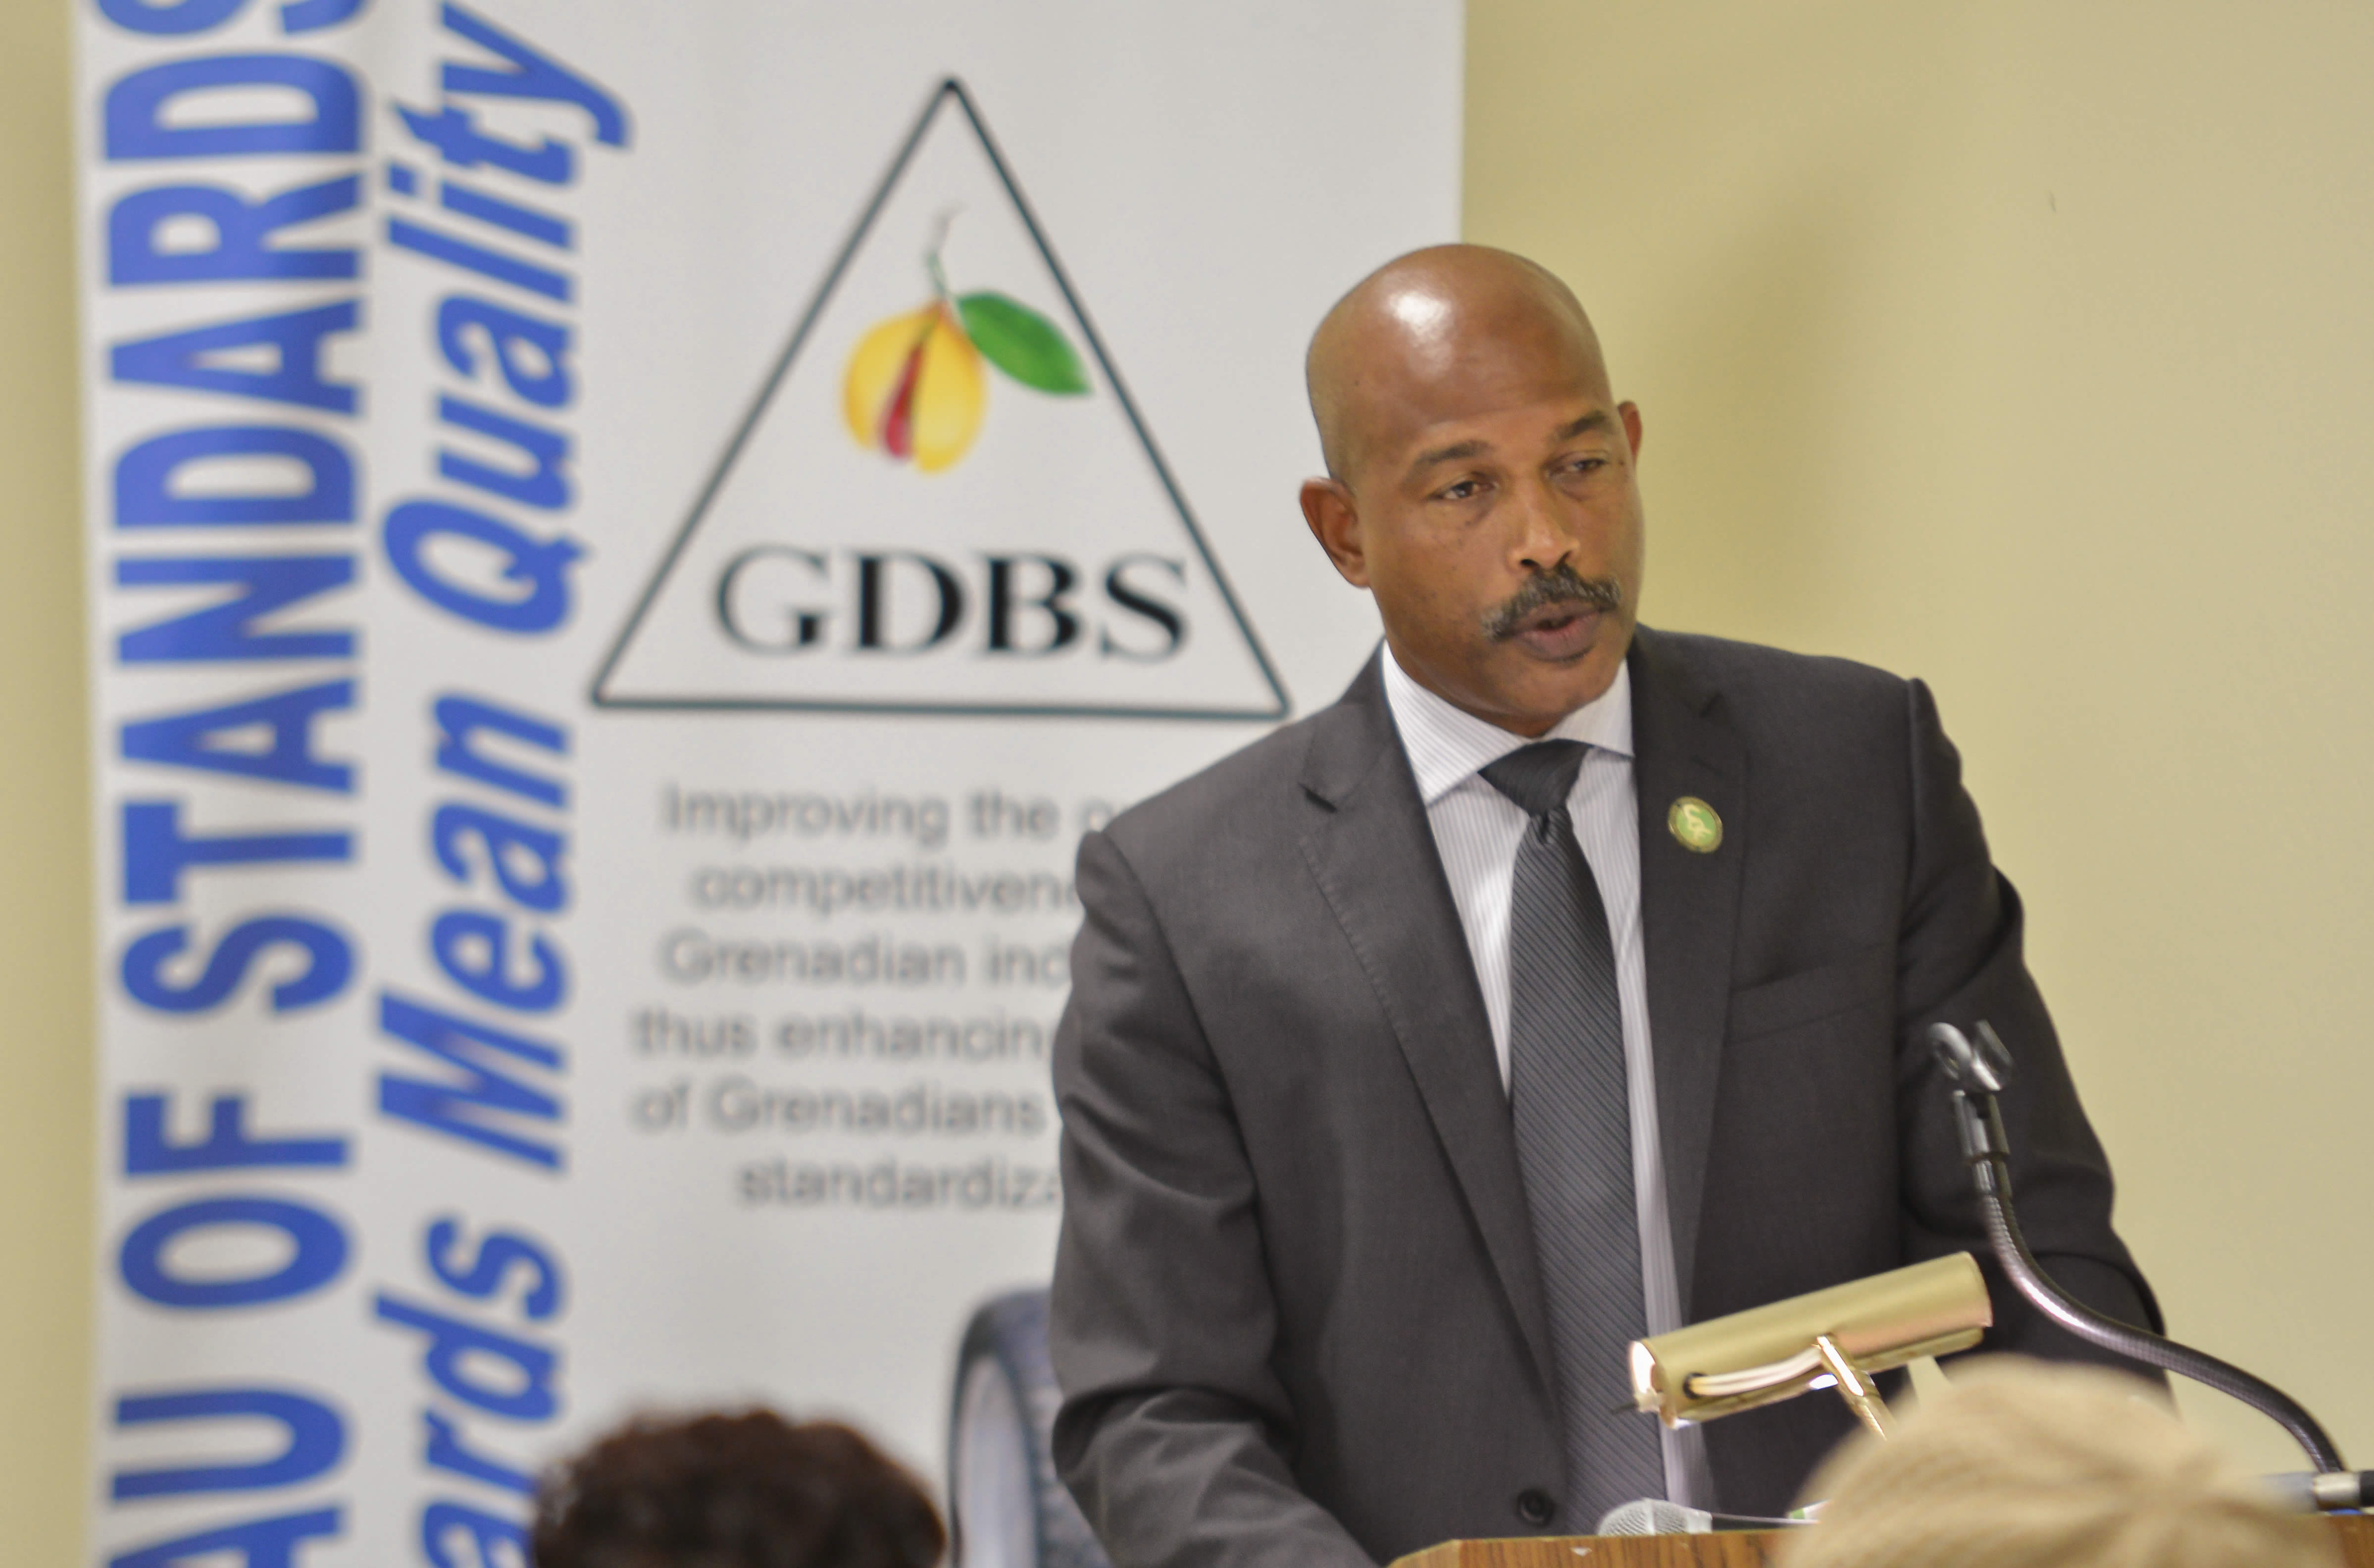 Mr. Soomer, CEO CDF addresses the audience at the Grenada Bureau of Standards commemorating the assistance received from the CDF.